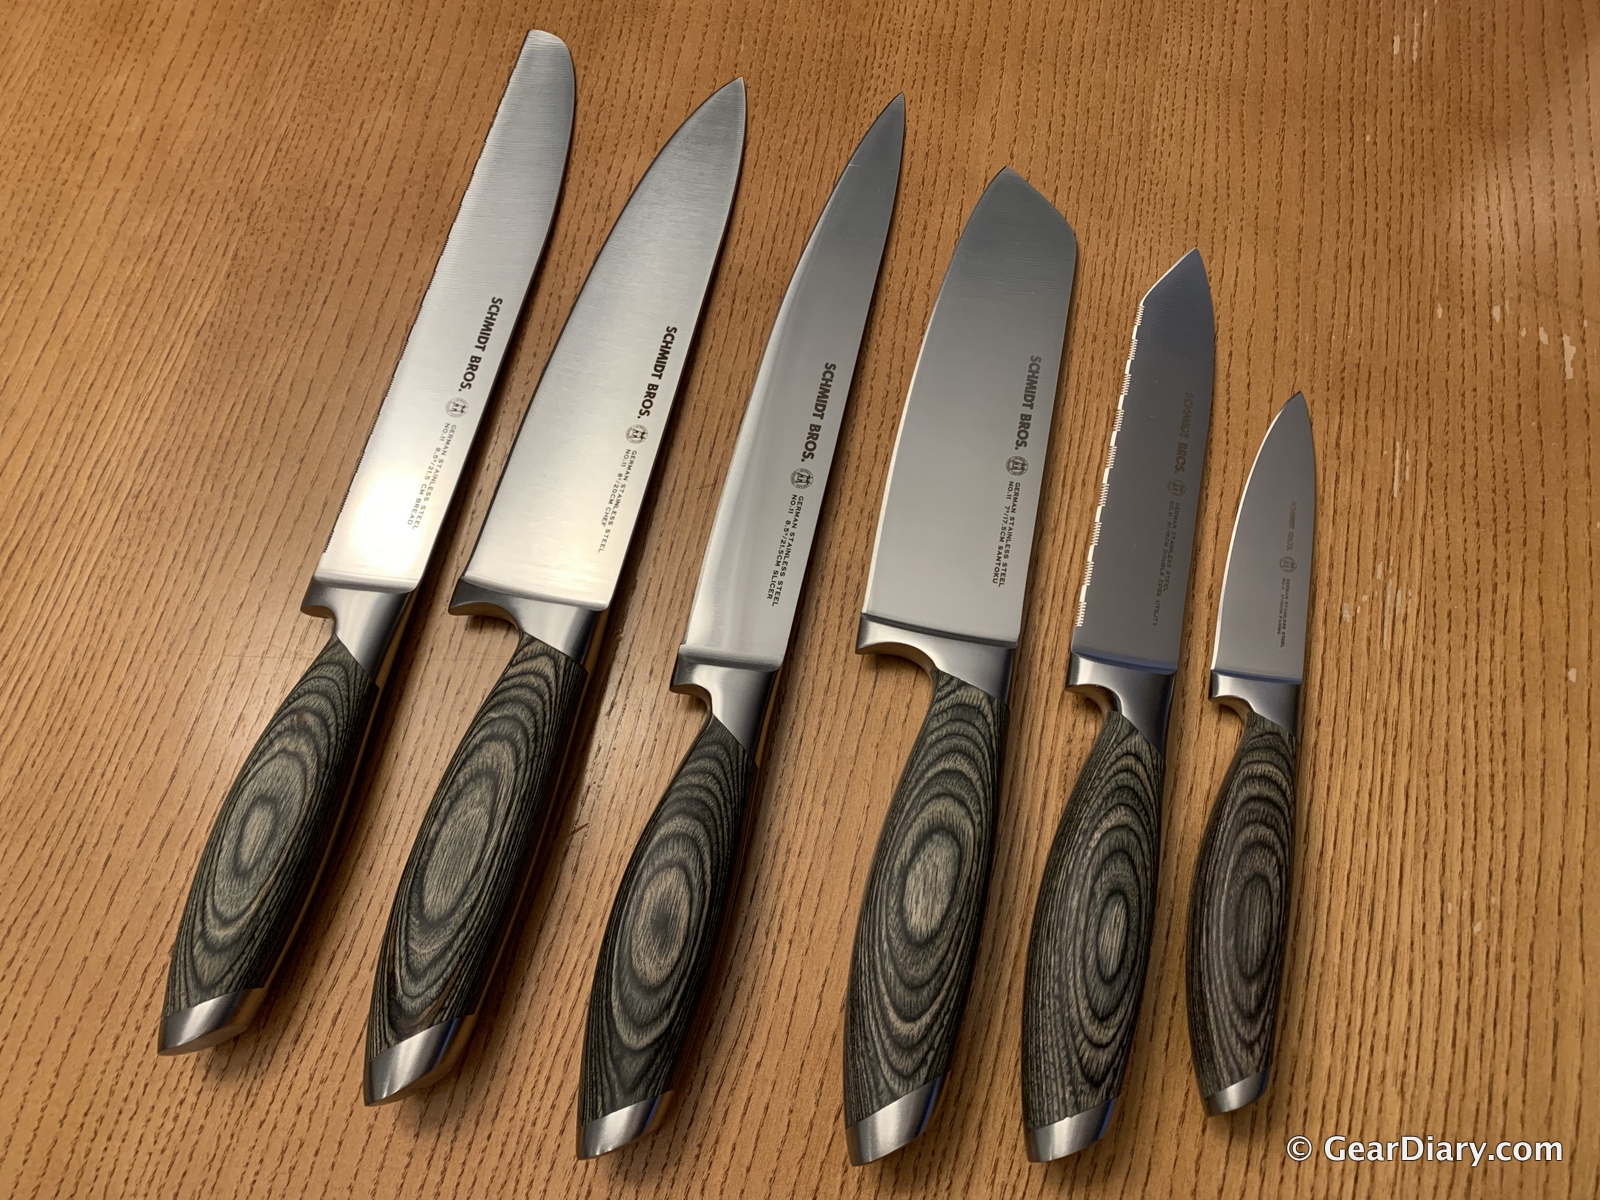 TOWER Kitchen Knives Set 5-PC Damascus Effect Acrylic Stand -Rose